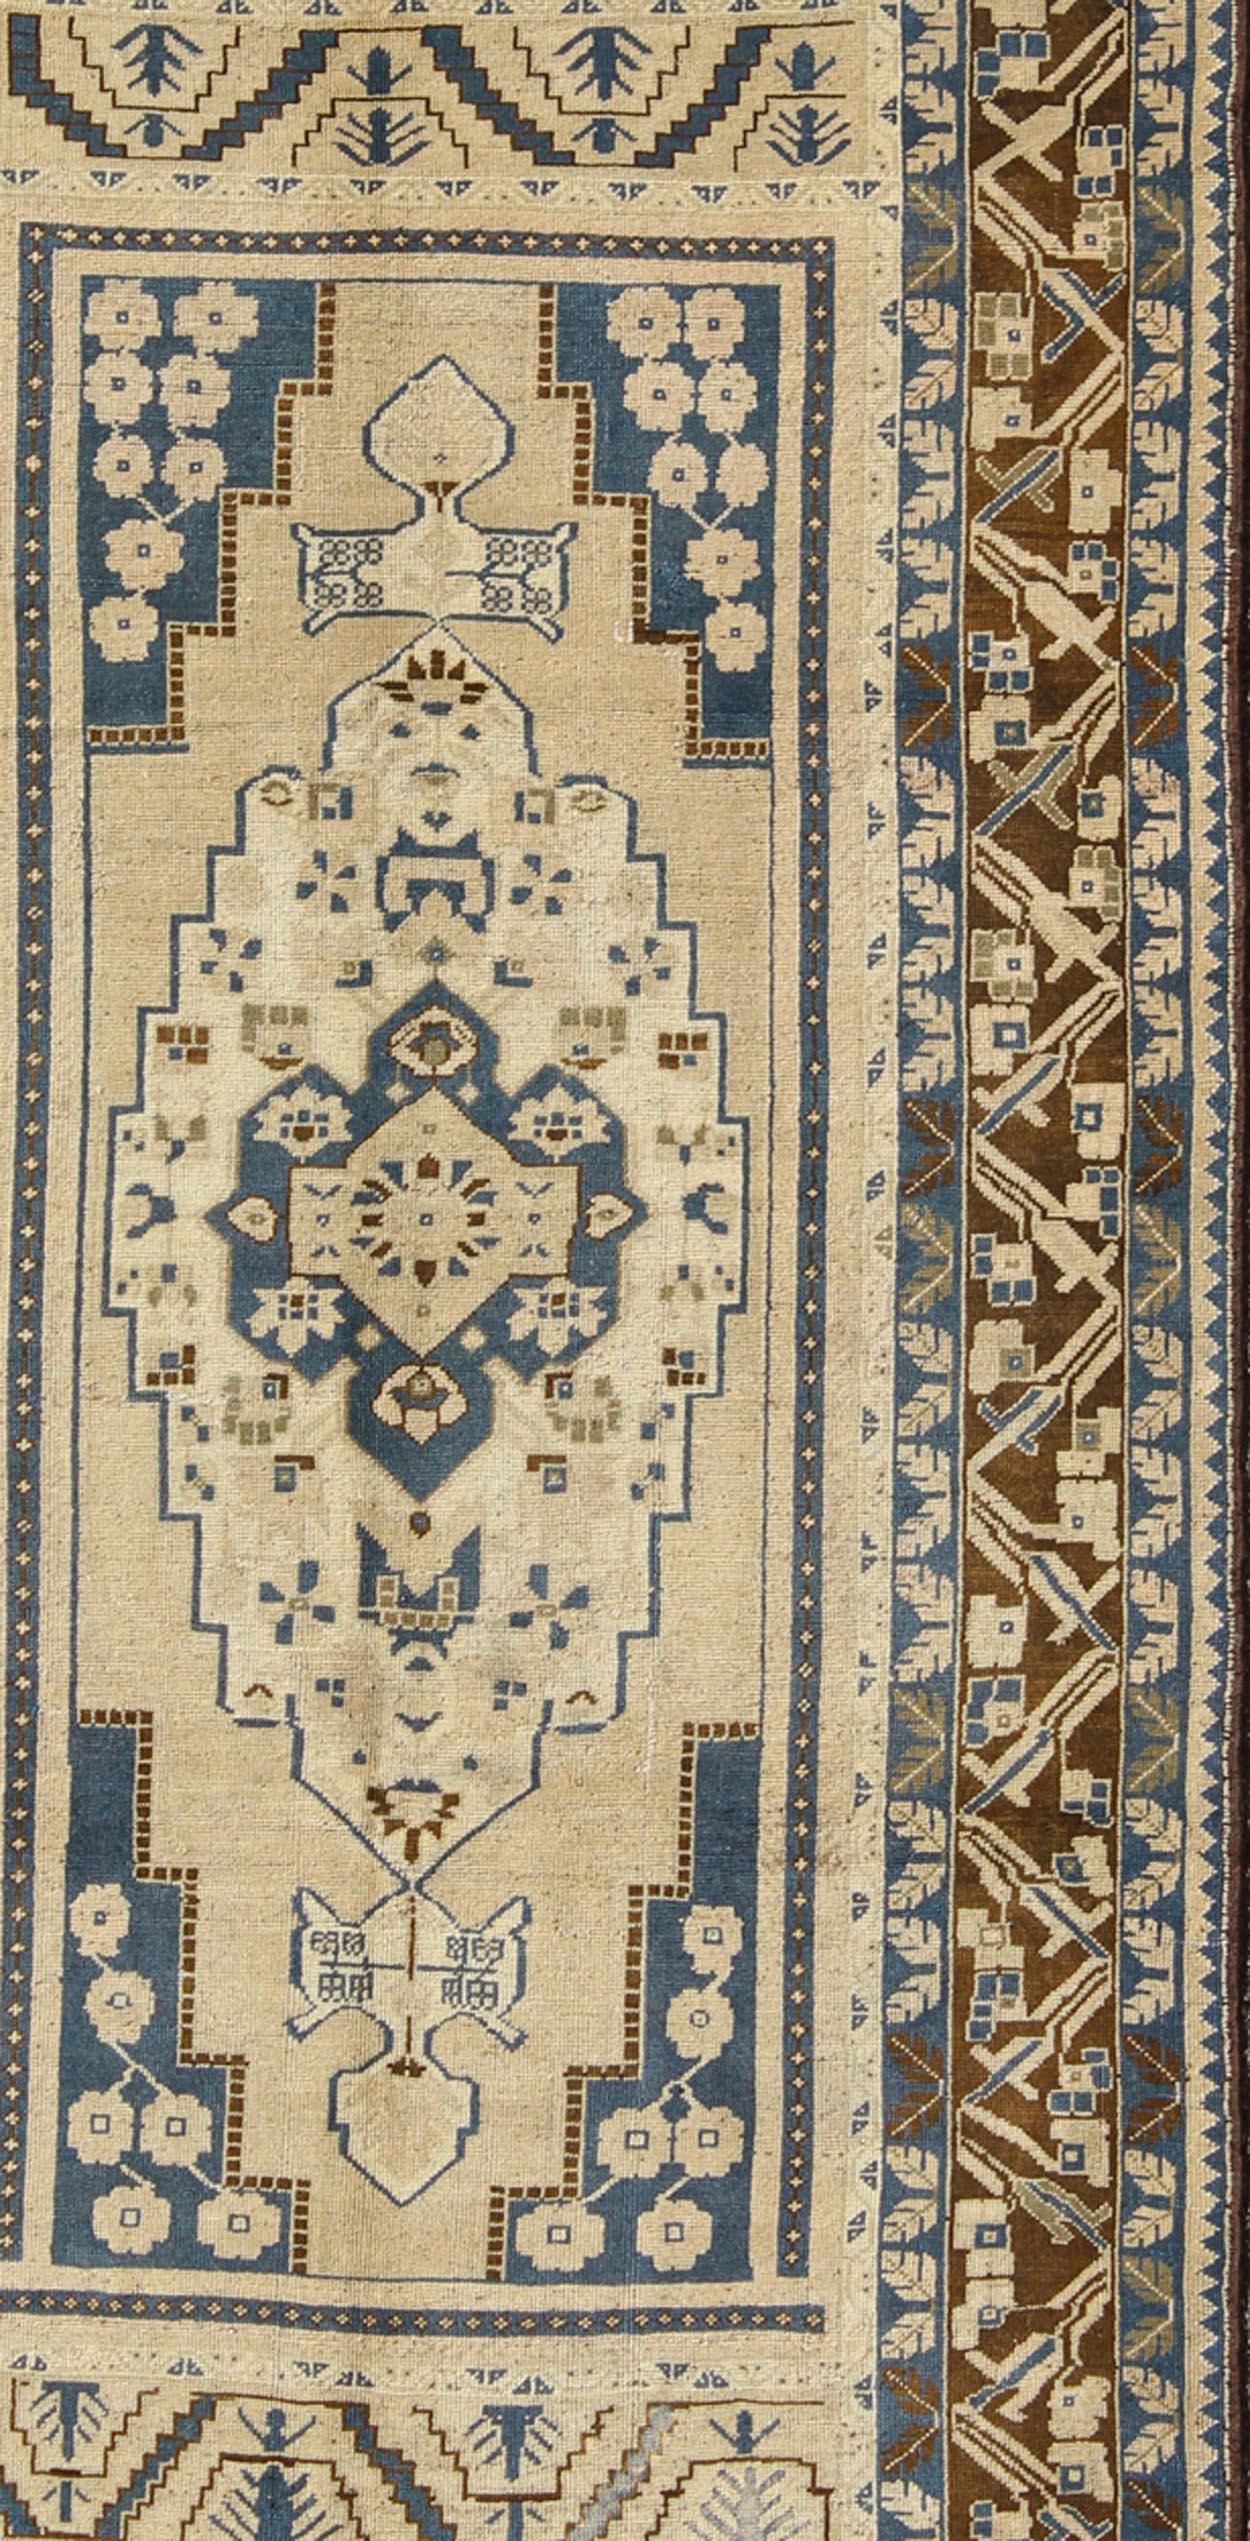 Blue and brown Oushak vintage rug from Turkey with Geometric Layered Medallion, Keivan Woven Arts / rug TU-VEY-17, country of origin / type: Turkey / Oushak, circa mid-20th century

This vintage Turkish Oushak carpet (circa mid-20th century)